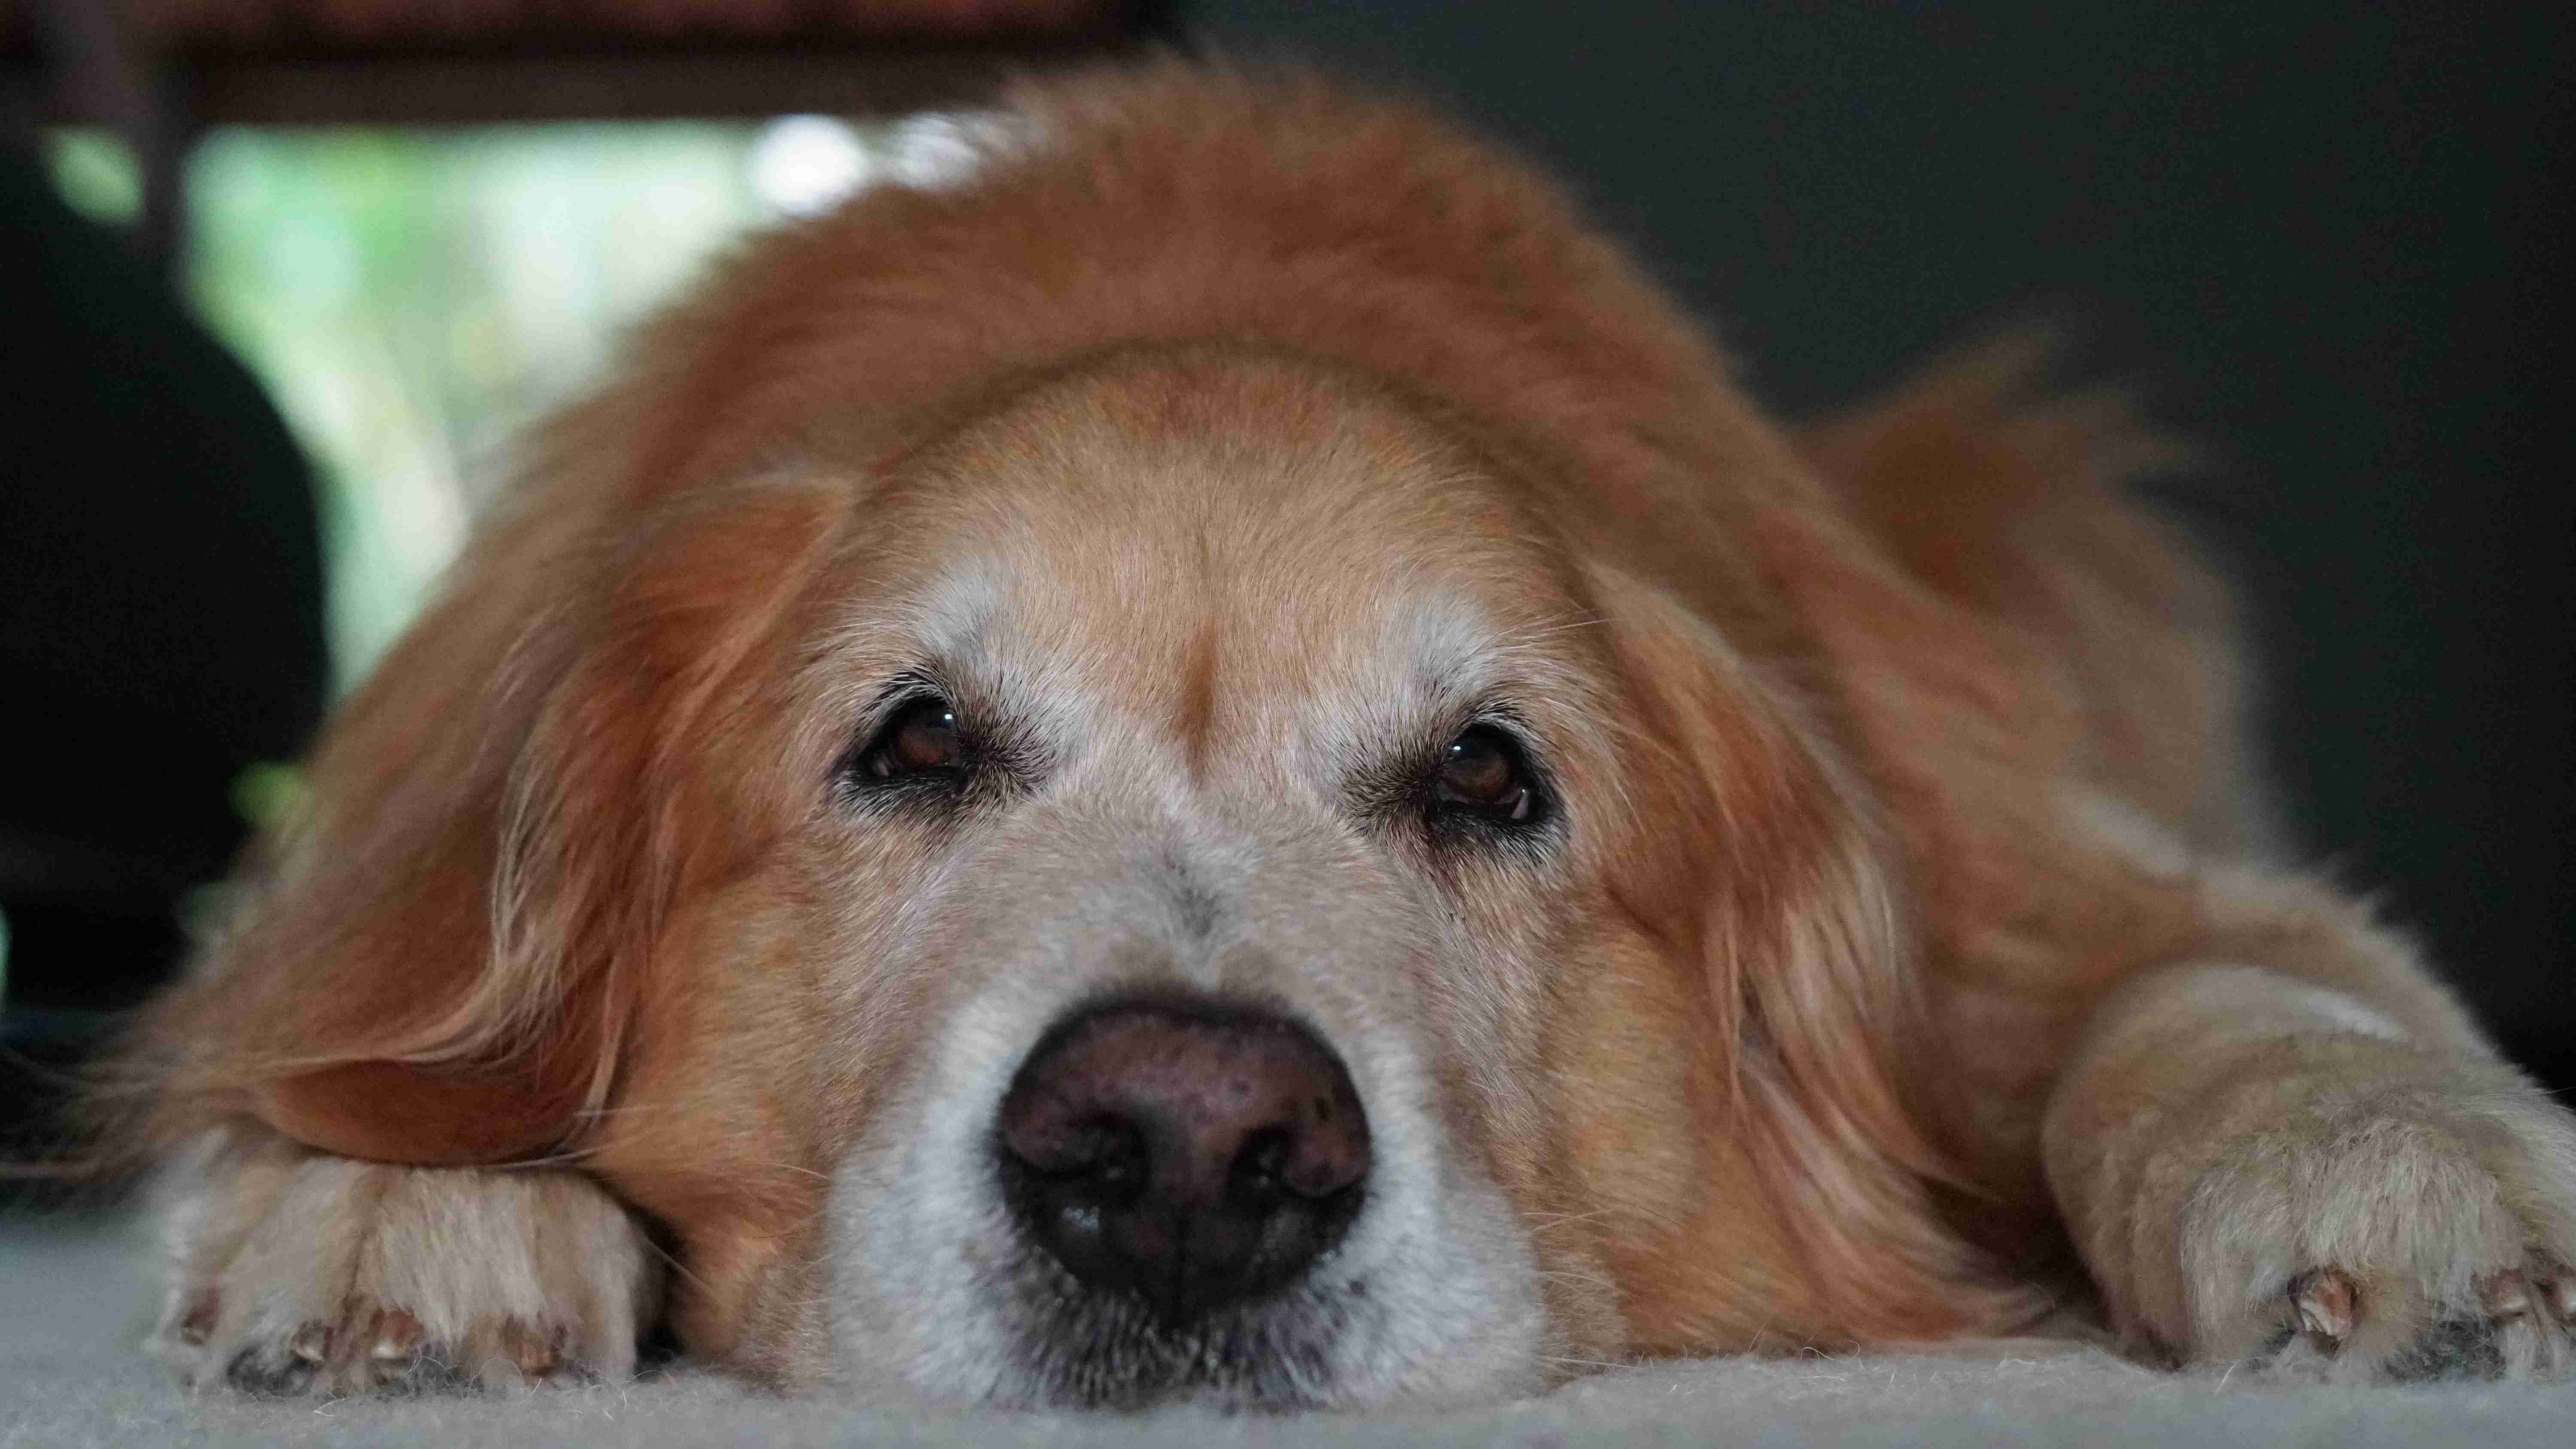 Can Golden Retrievers be prone to any specific skin conditions?